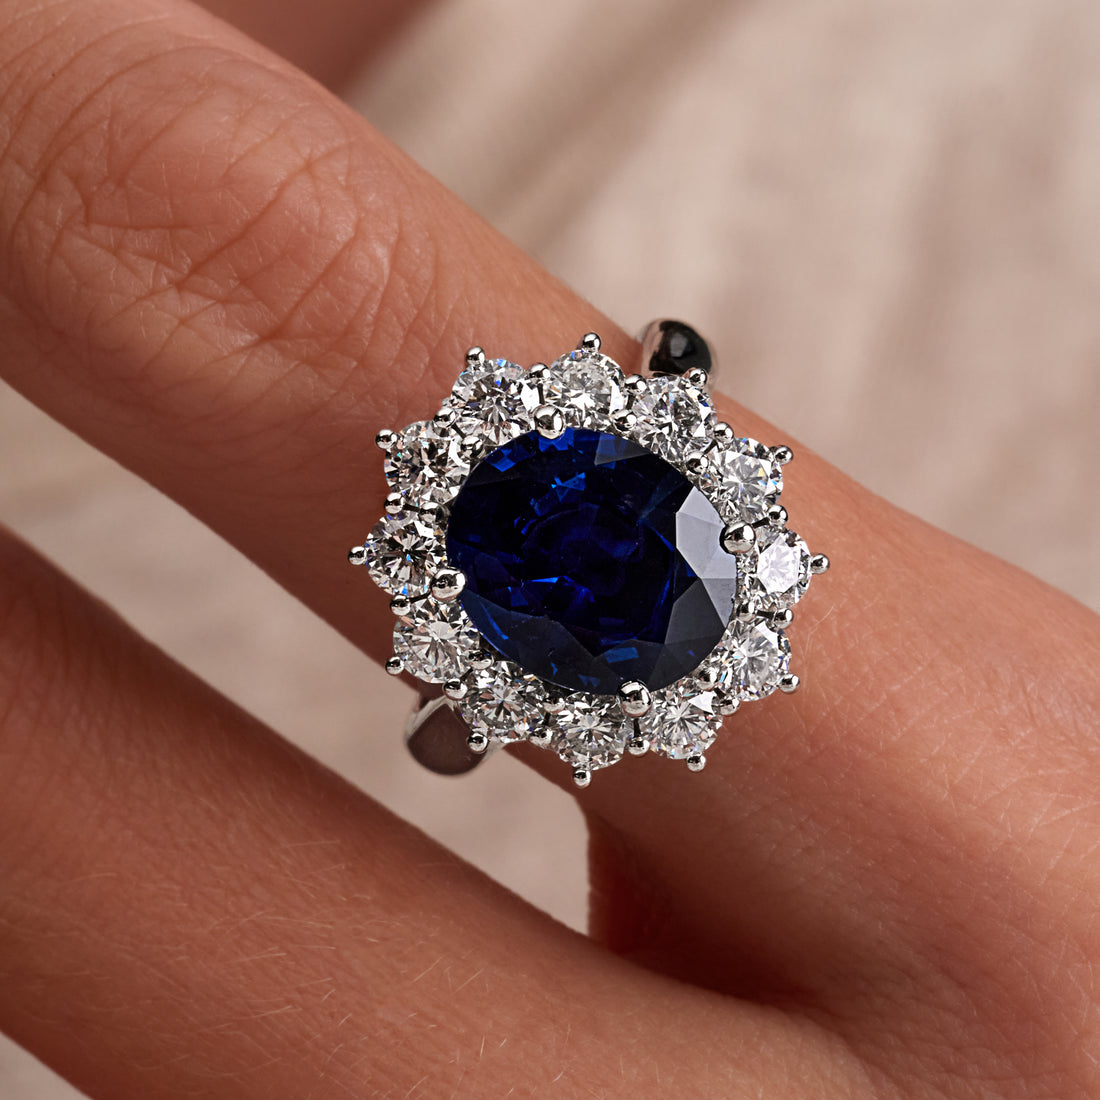 5.96 CT. Oval Cut Blue Sapphire and Round Brilliant Diamond Ring in Platinum